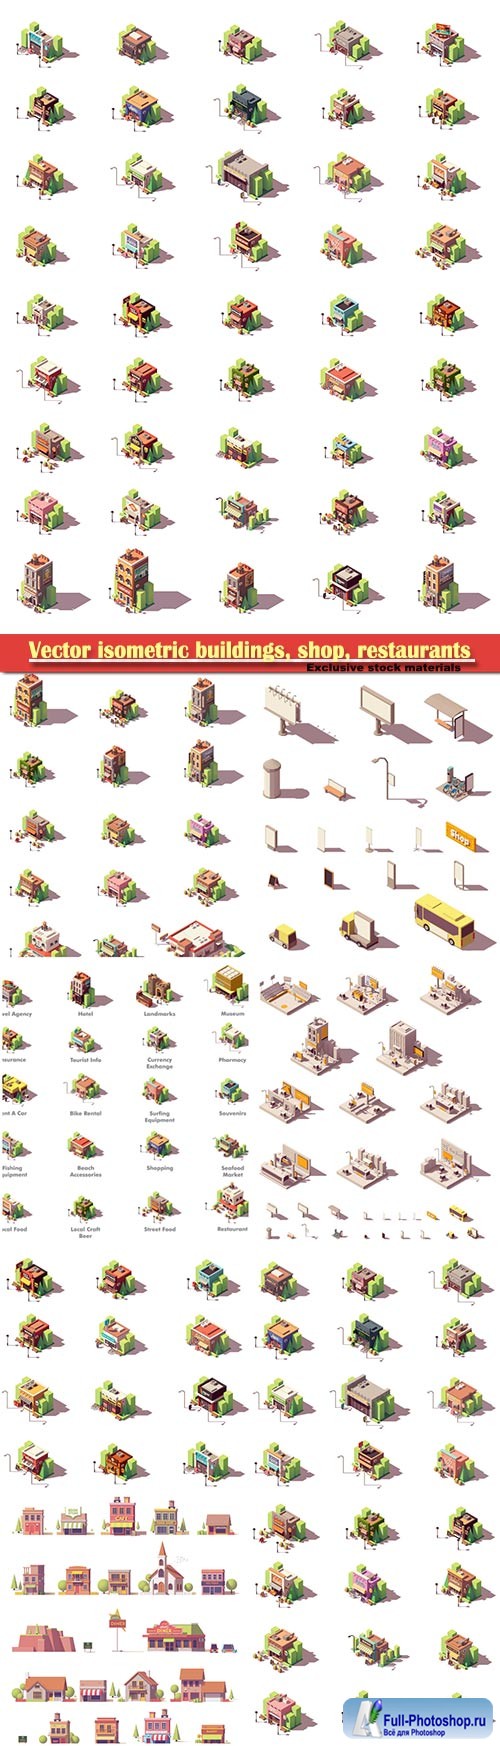 Vector isometric buildings, shop, restaurants, travel and tourism icons set